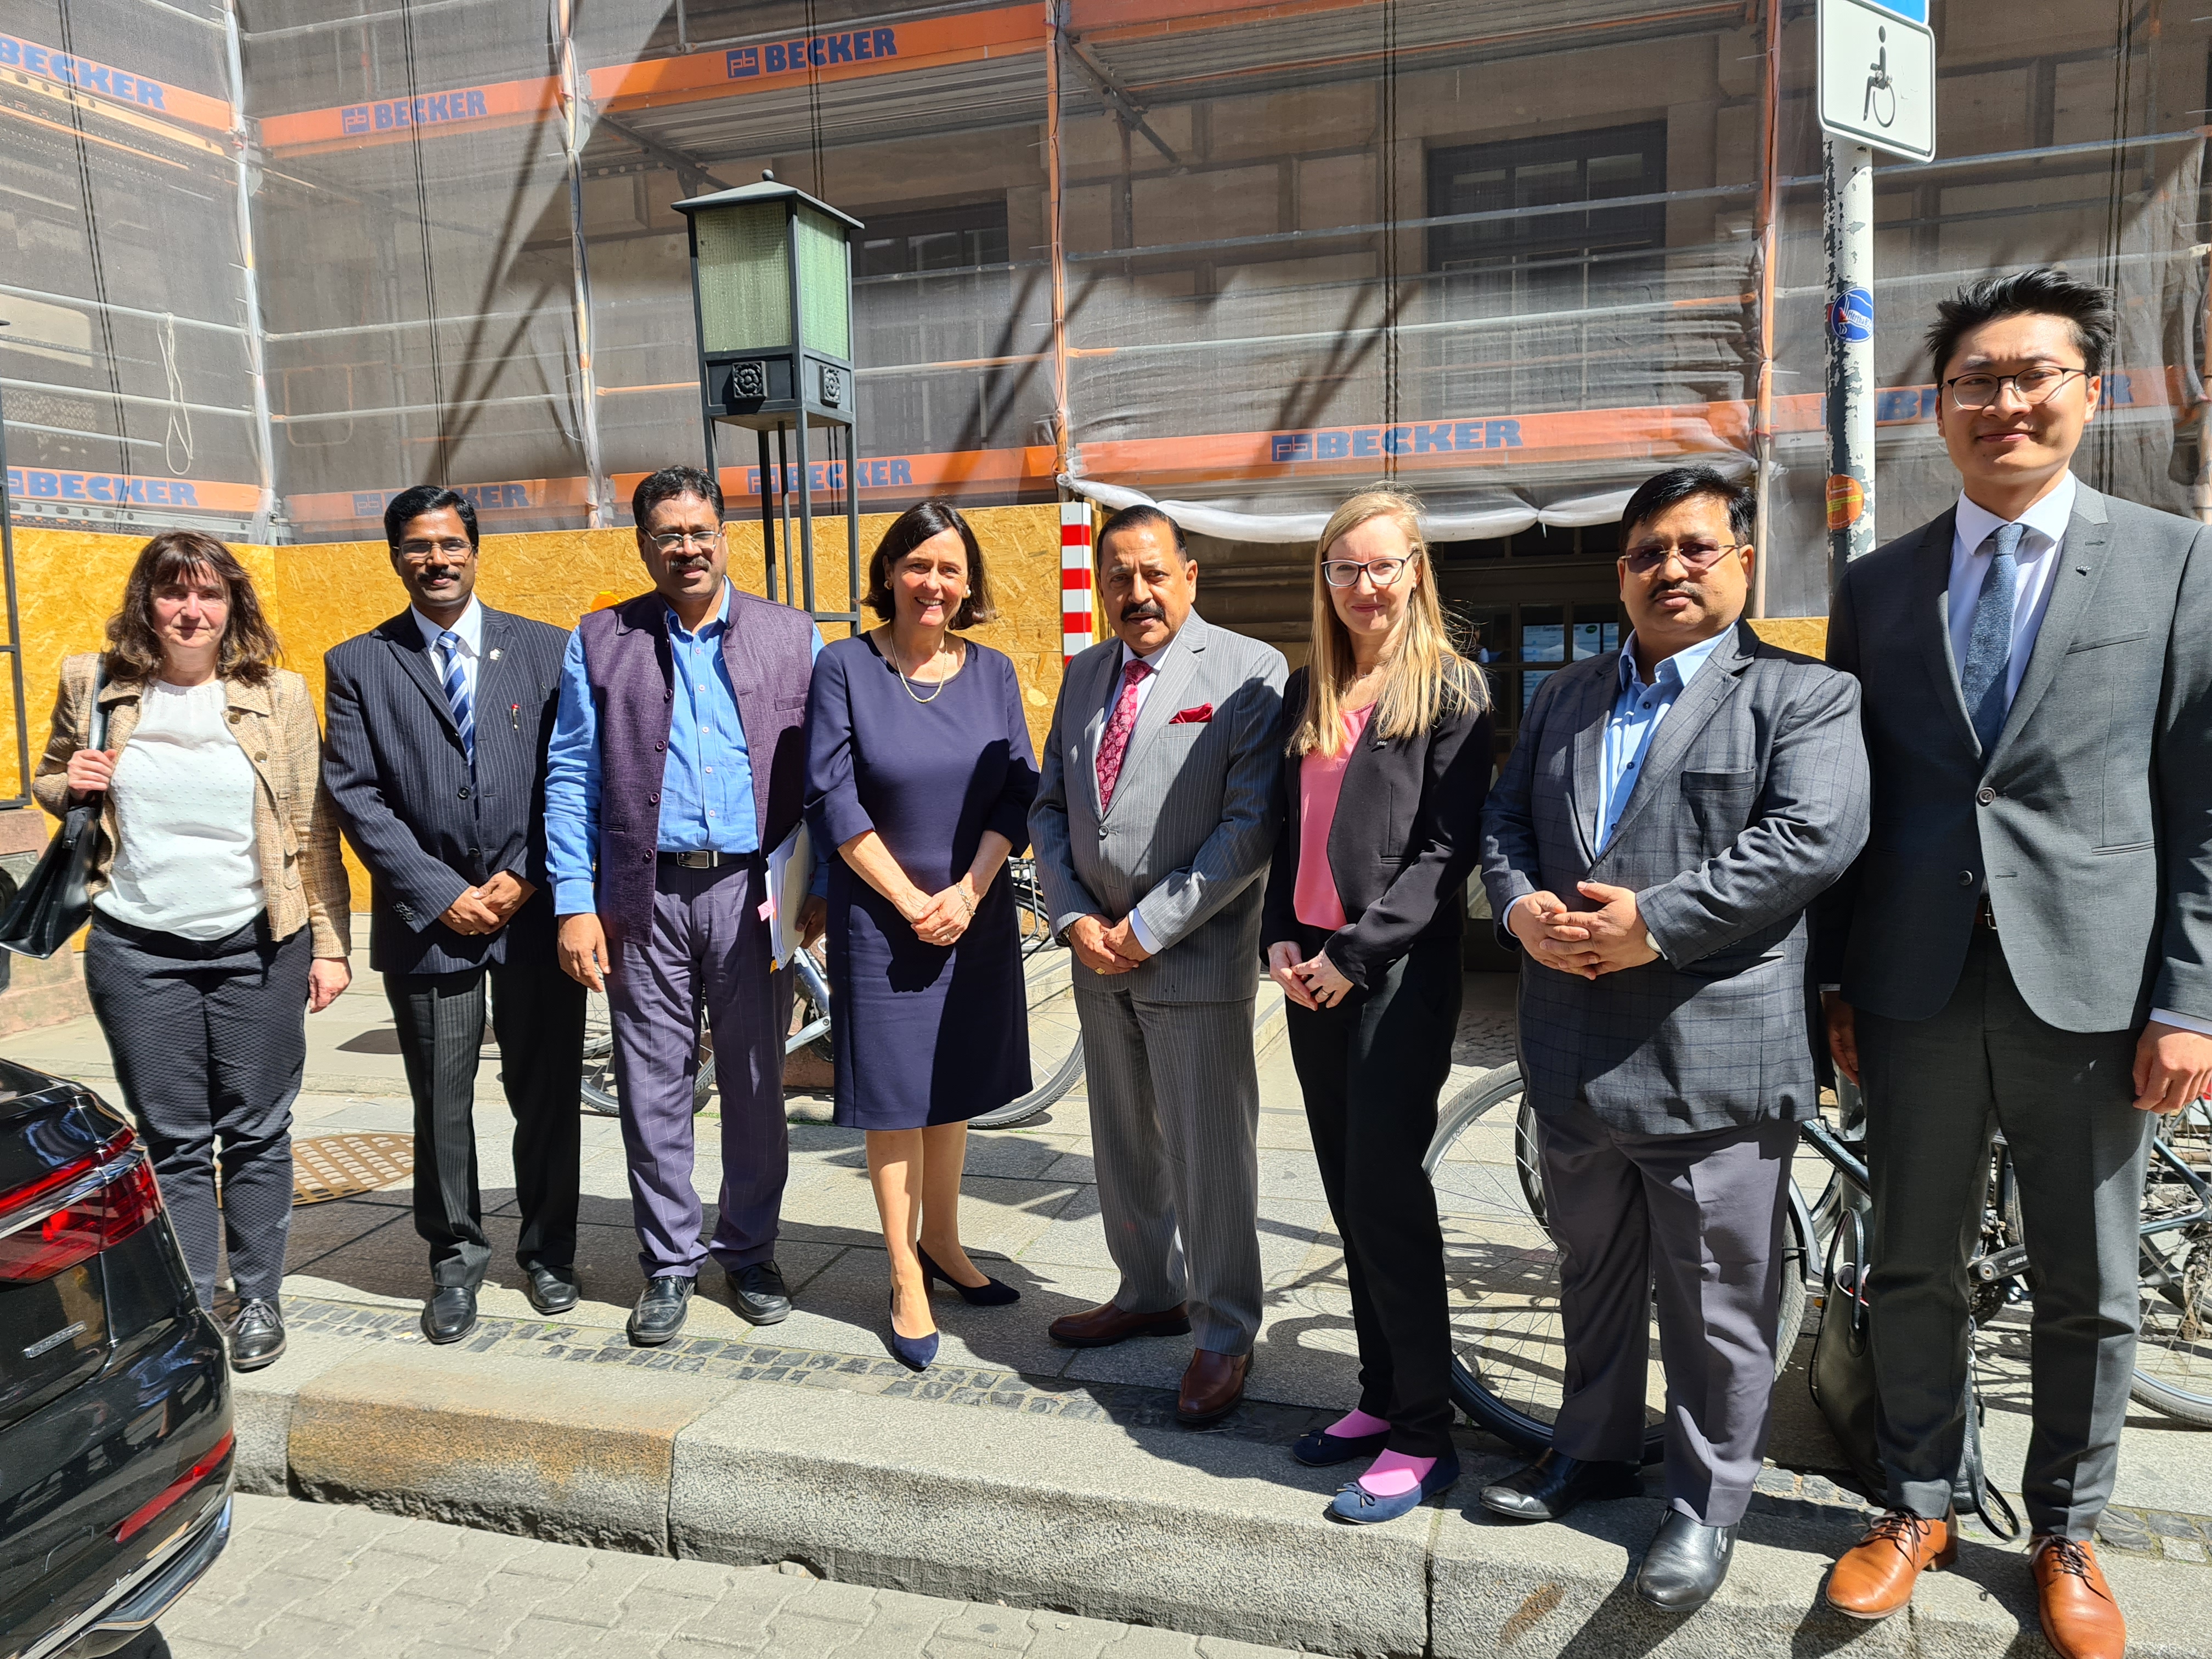 Intergovernmental Consultations between India and Germany in Berlin with Prof. Katja Becker and Minister of State (Independent Charge) for Science and Technology and Earth Sciences Dr. Jitendra Singh